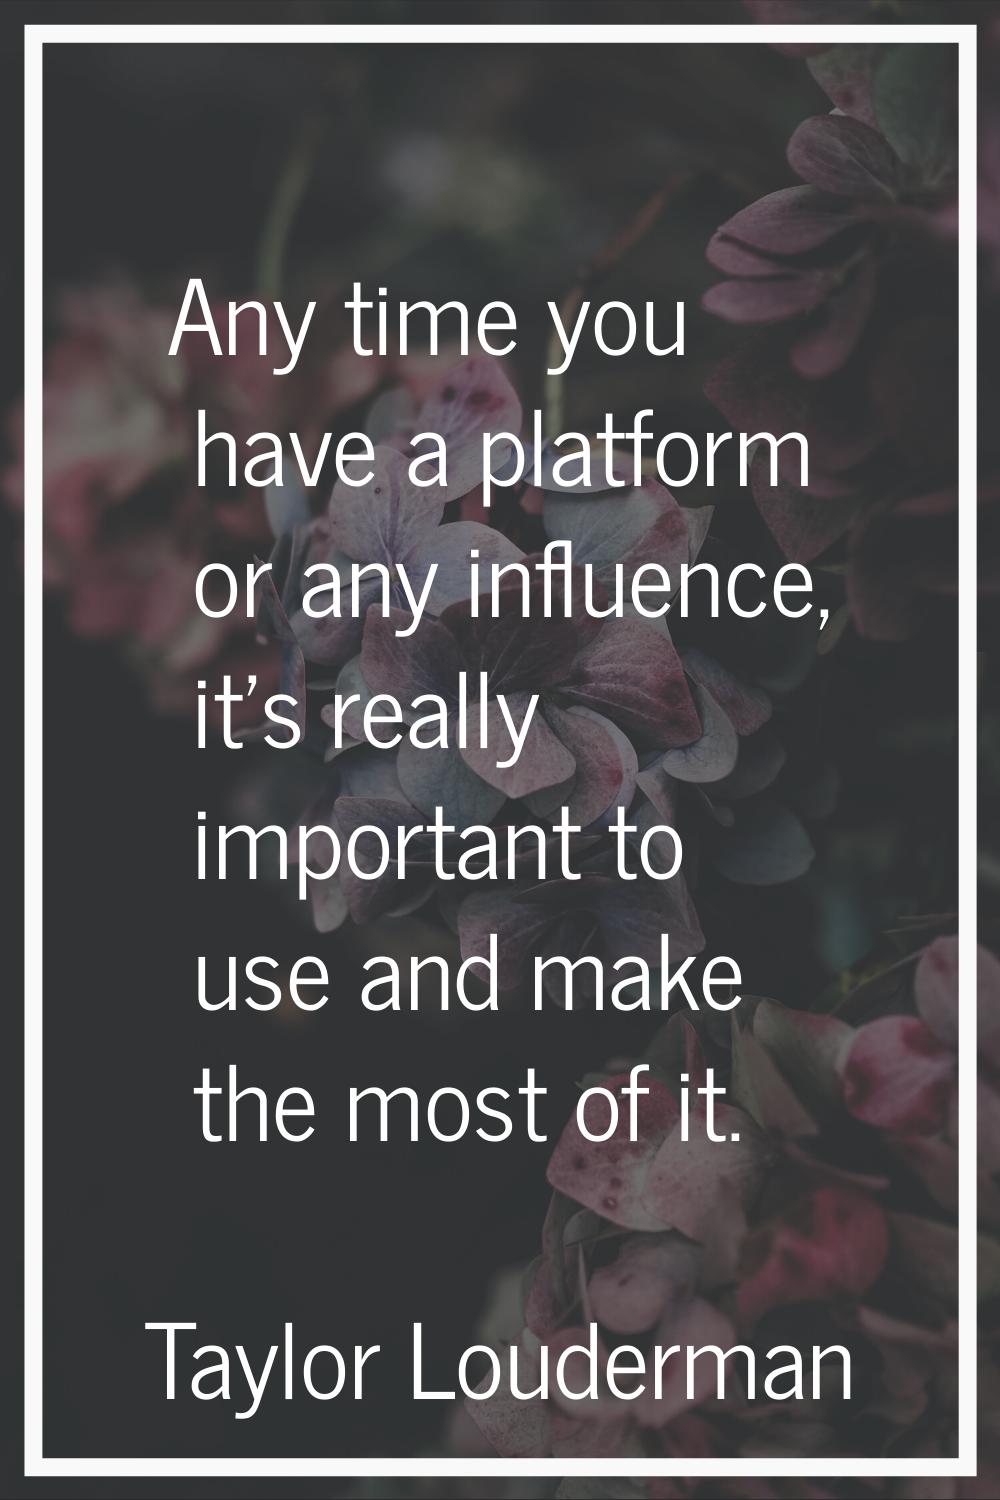 Any time you have a platform or any influence, it's really important to use and make the most of it